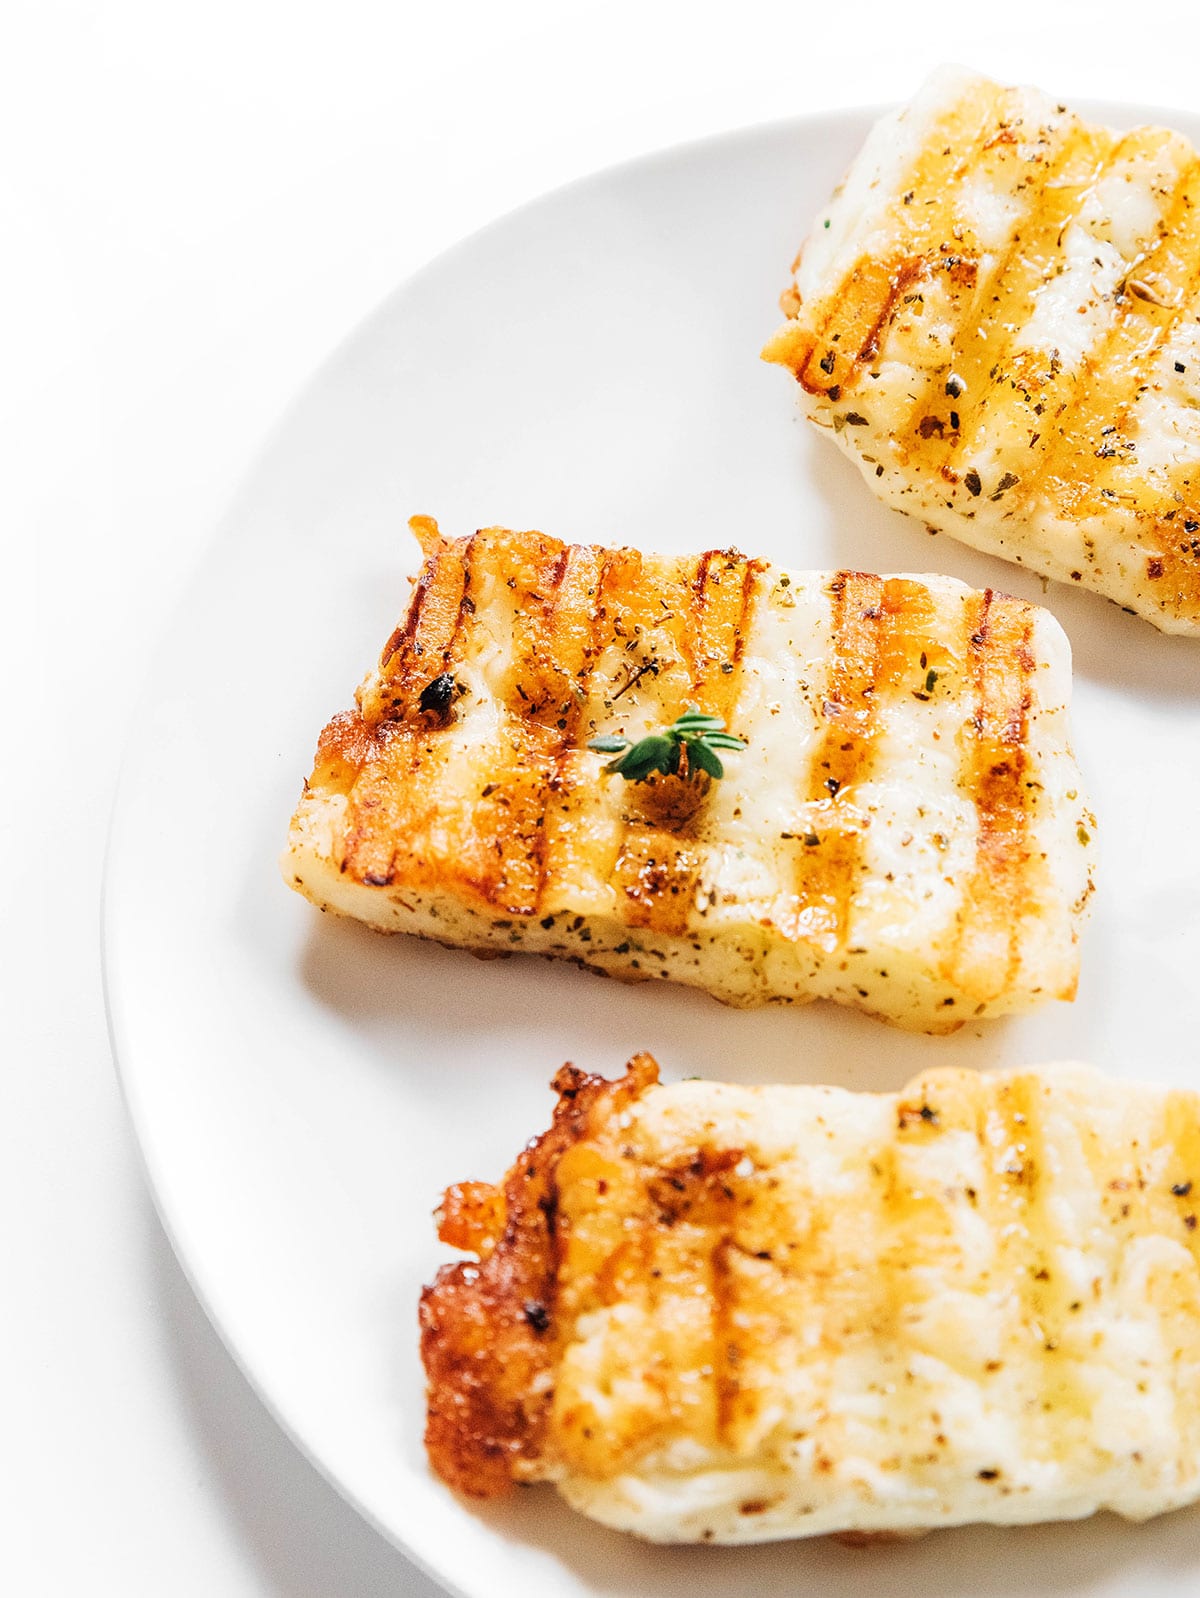 Grilled halloumi cheese on a white plate